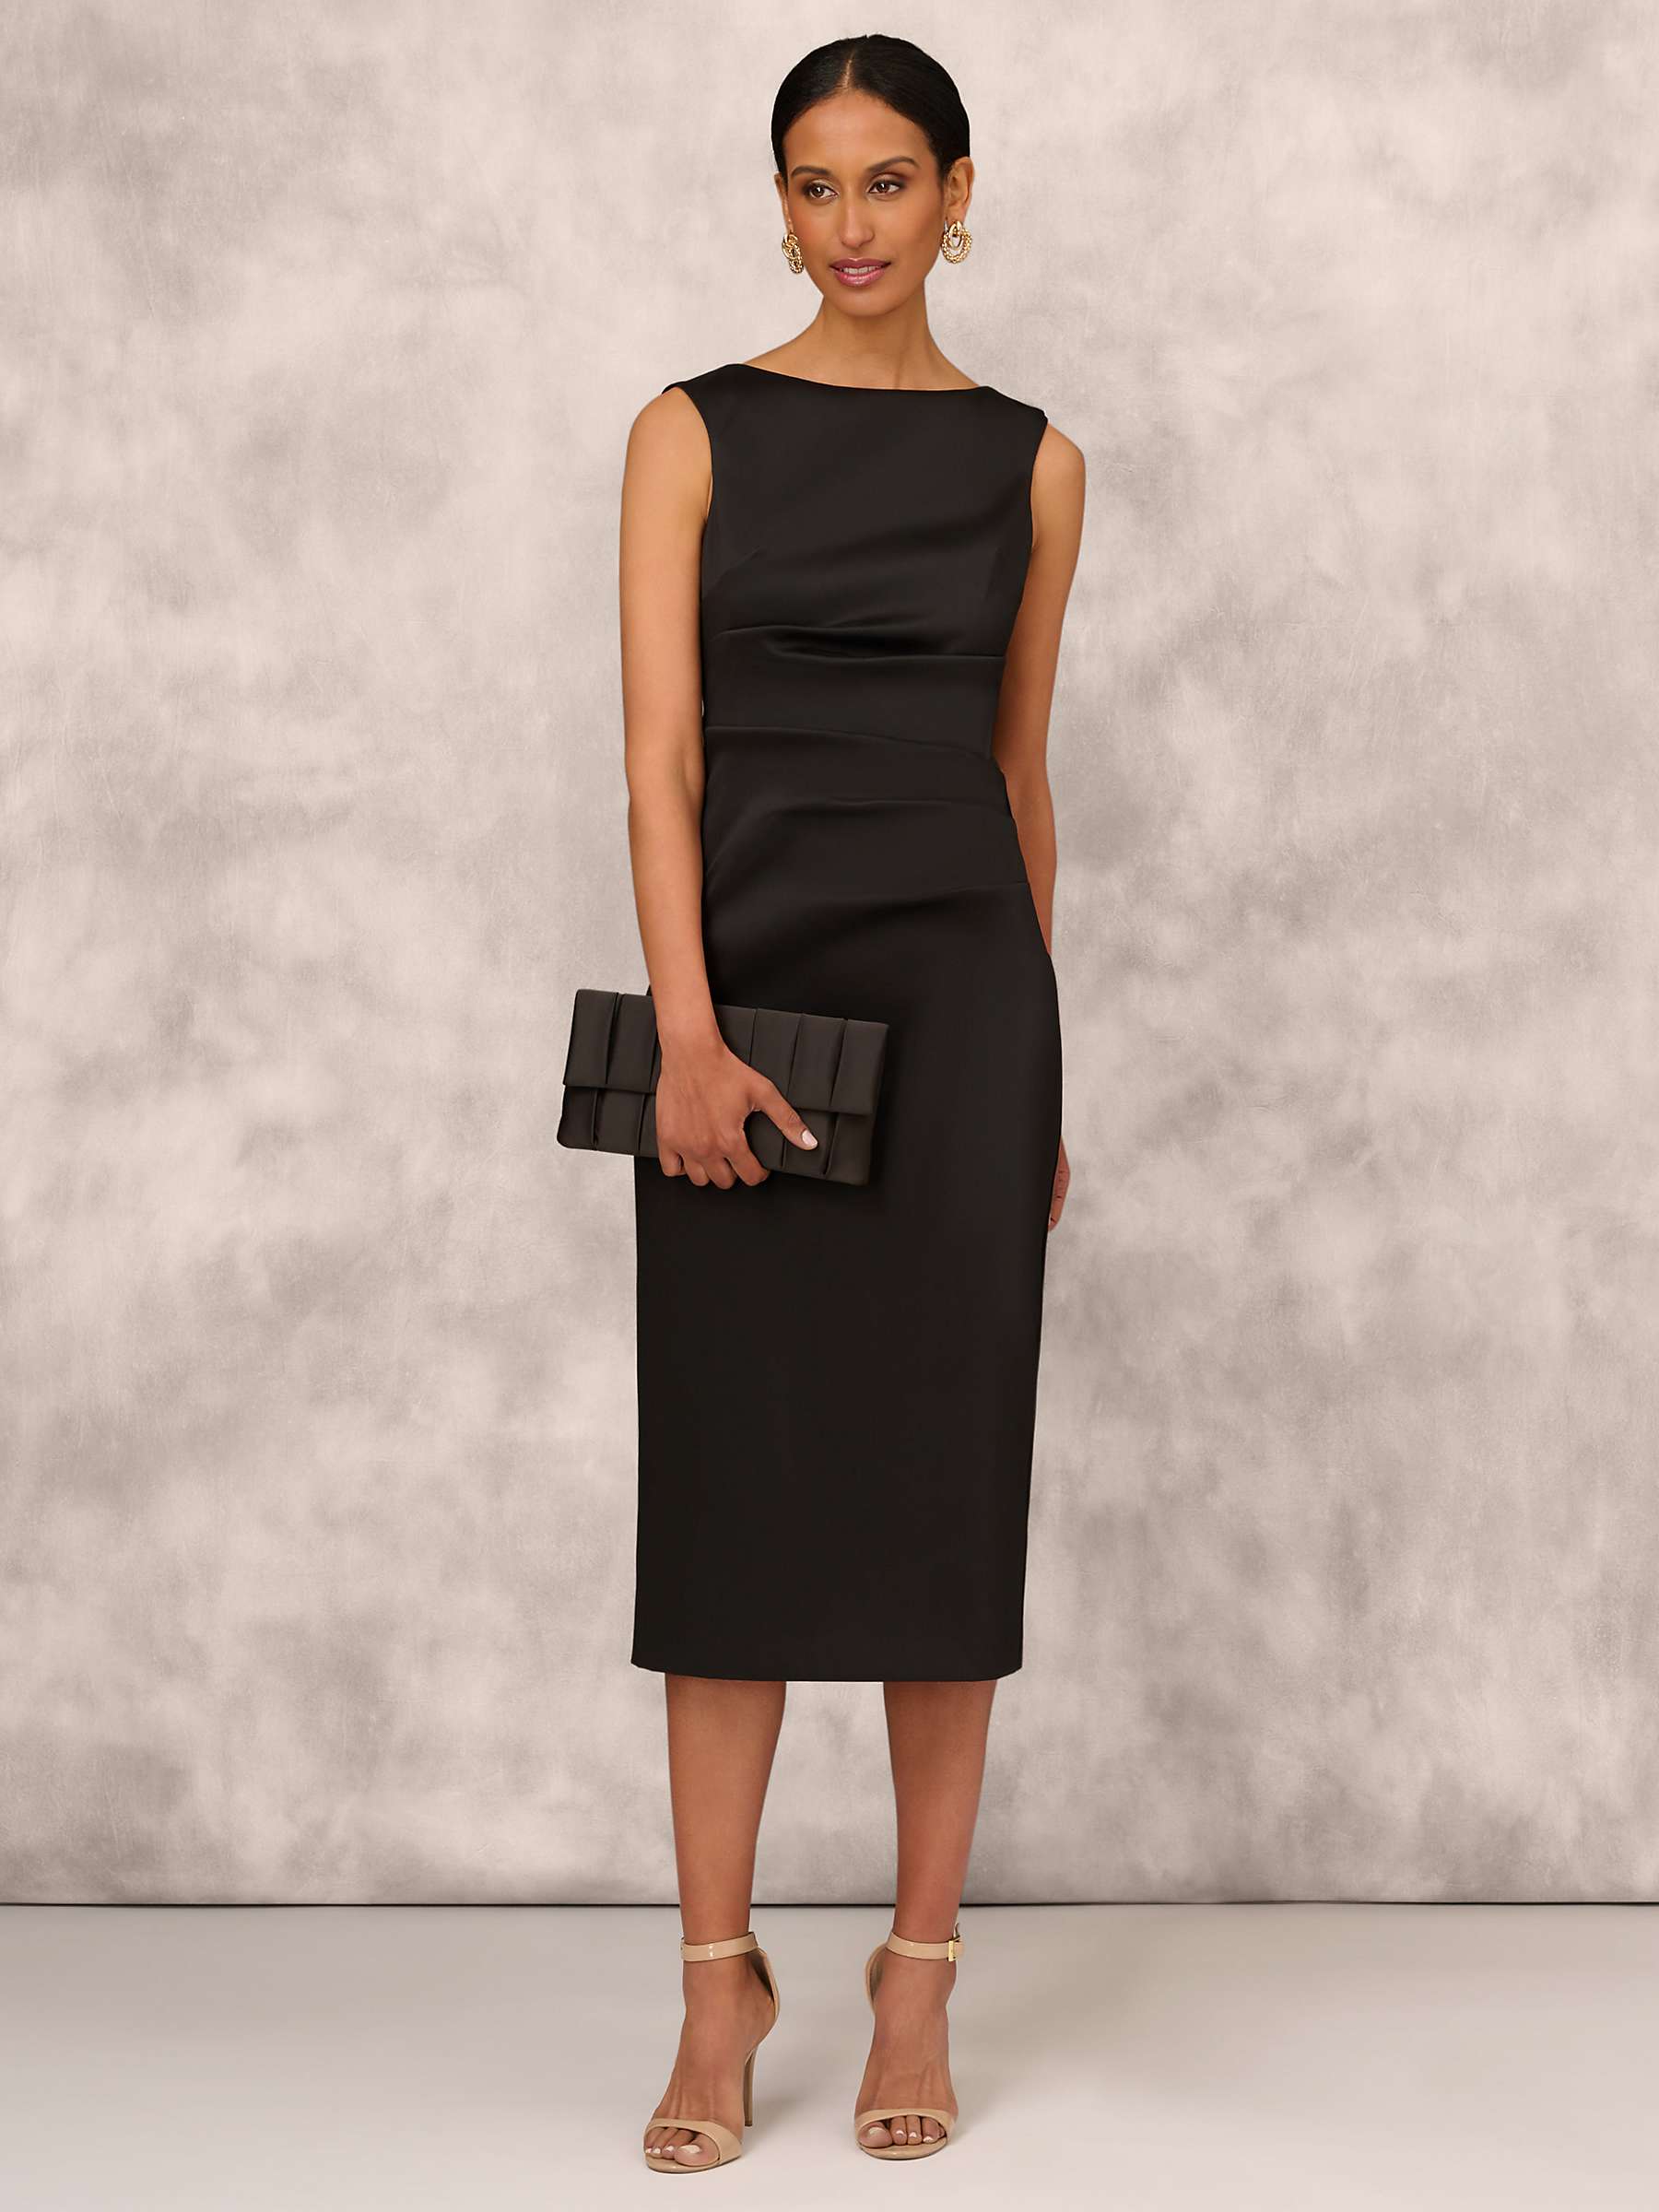 Buy Adrianna Papell Aidan Mattox by Adrianna Papell Stretch Mikado Gown, Black Online at johnlewis.com